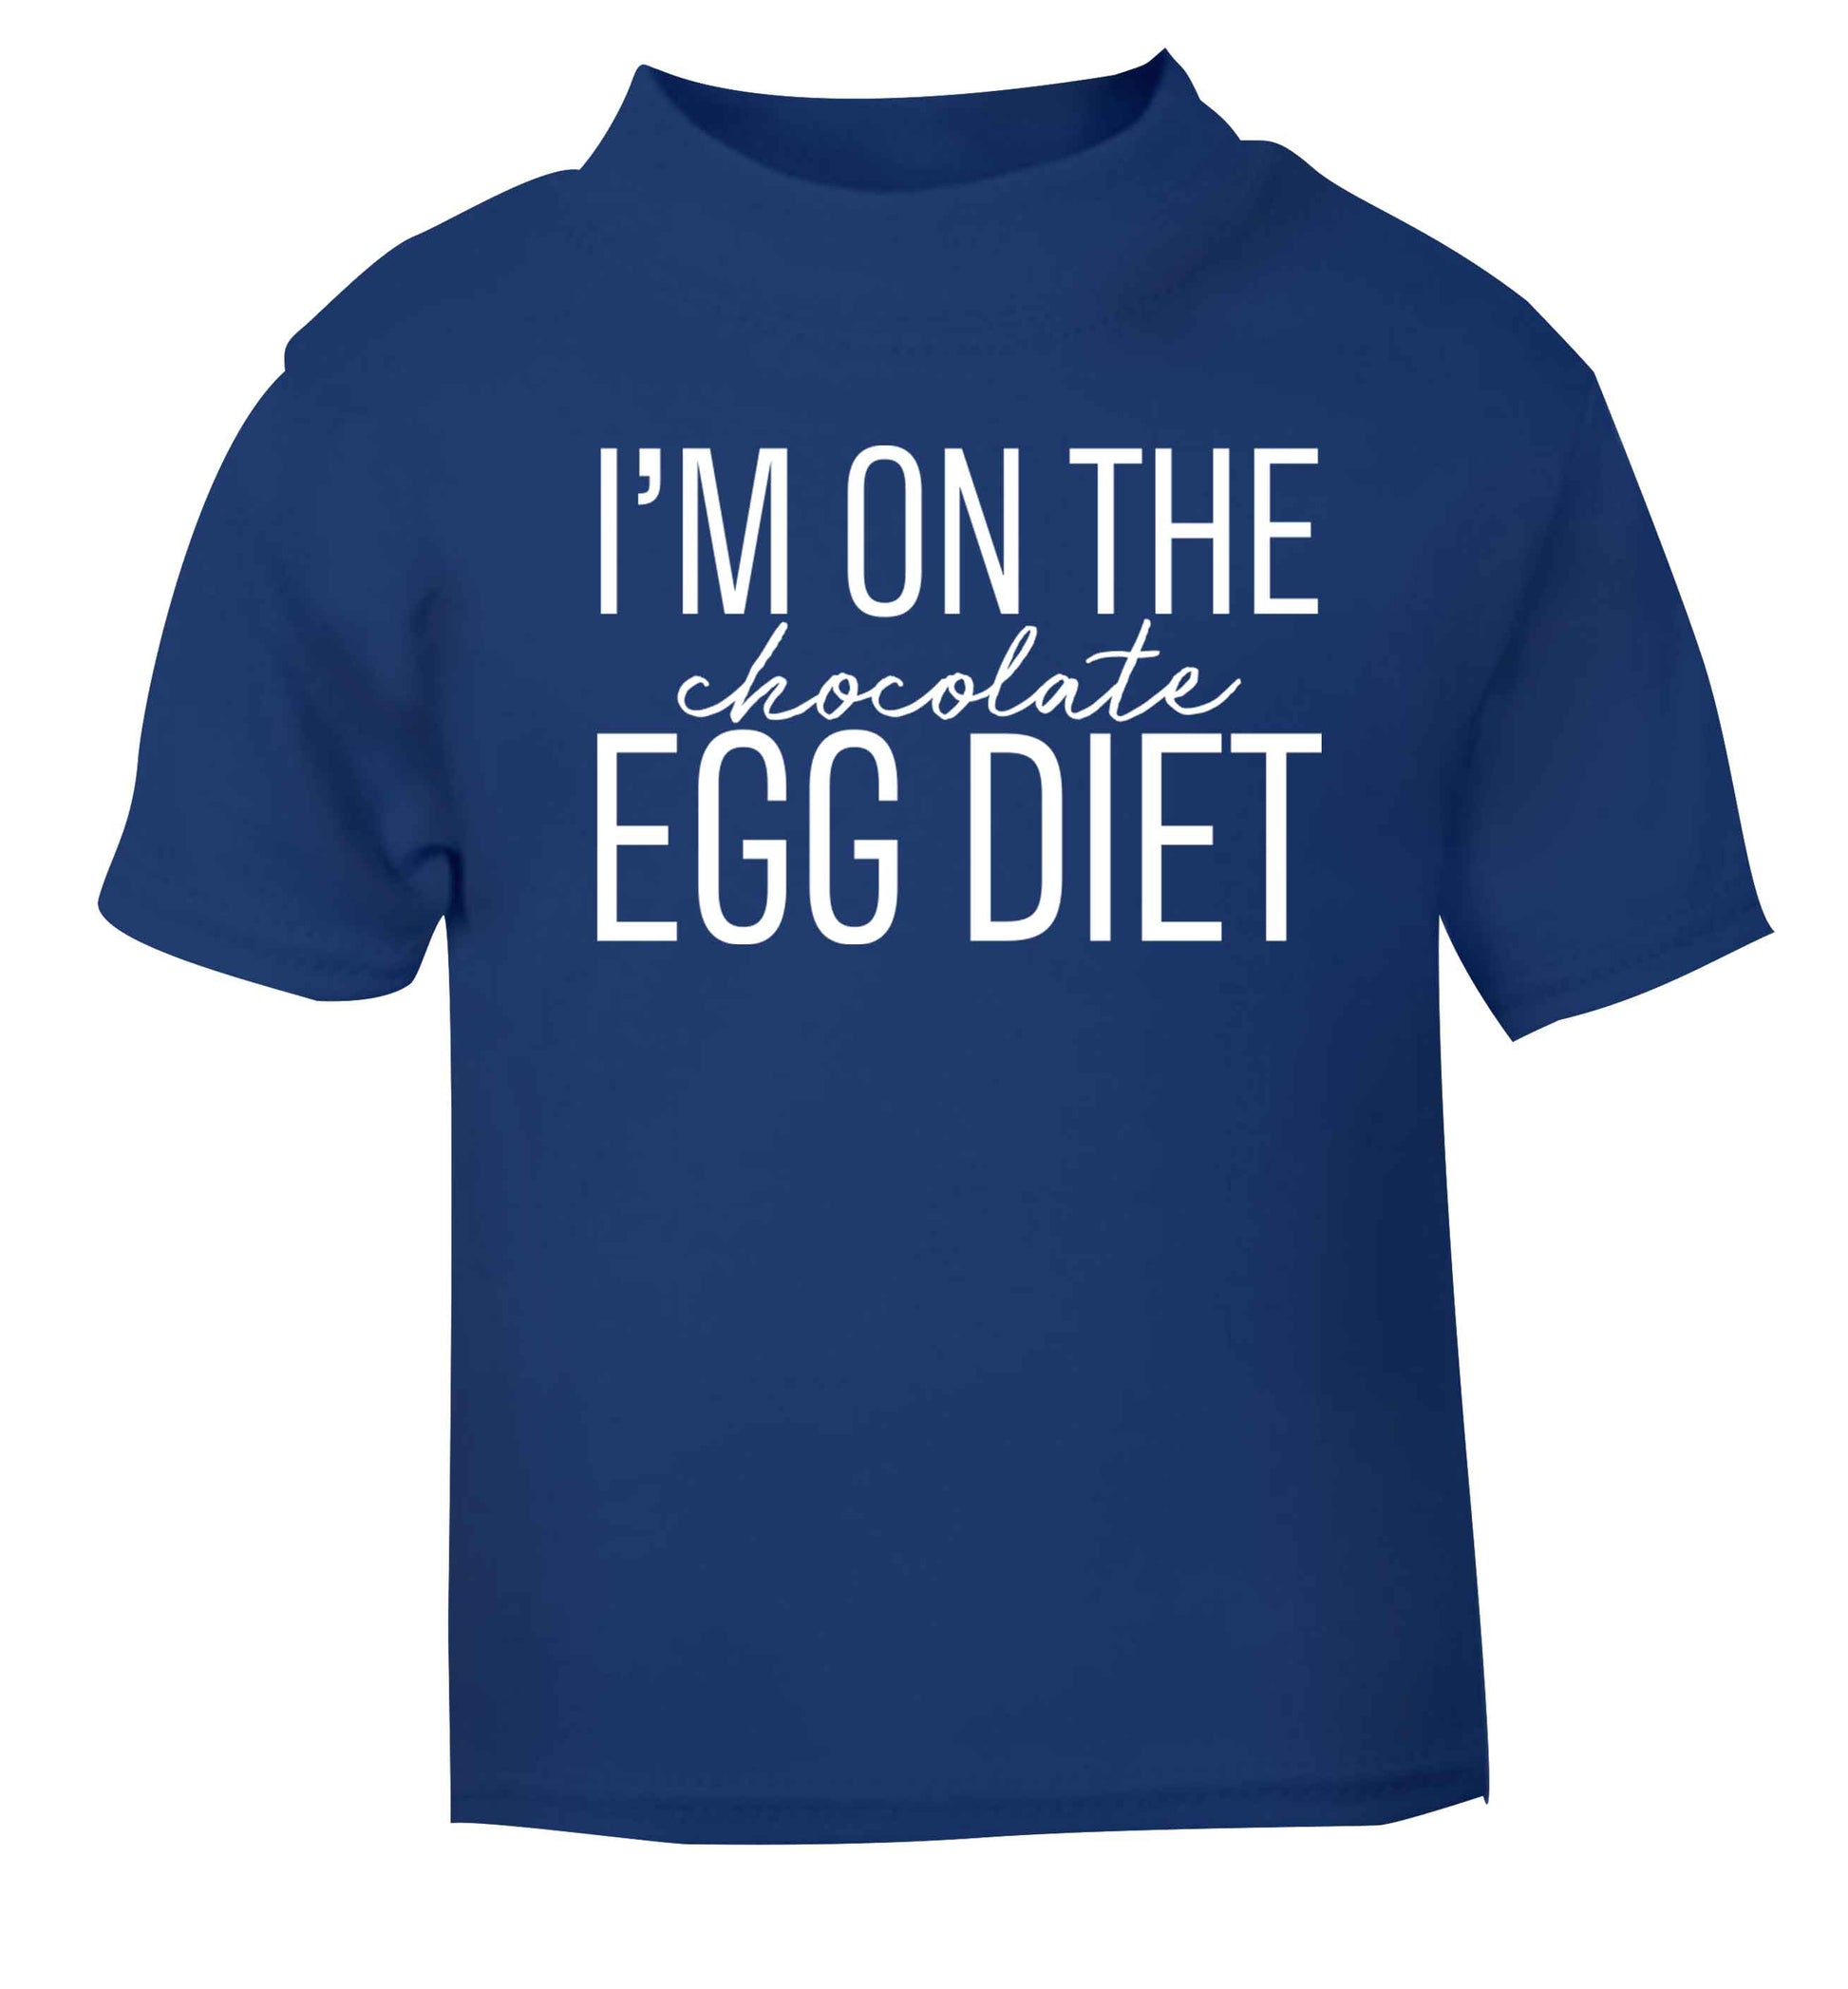 I'm on the chocolate egg diet blue baby toddler Tshirt 2 Years